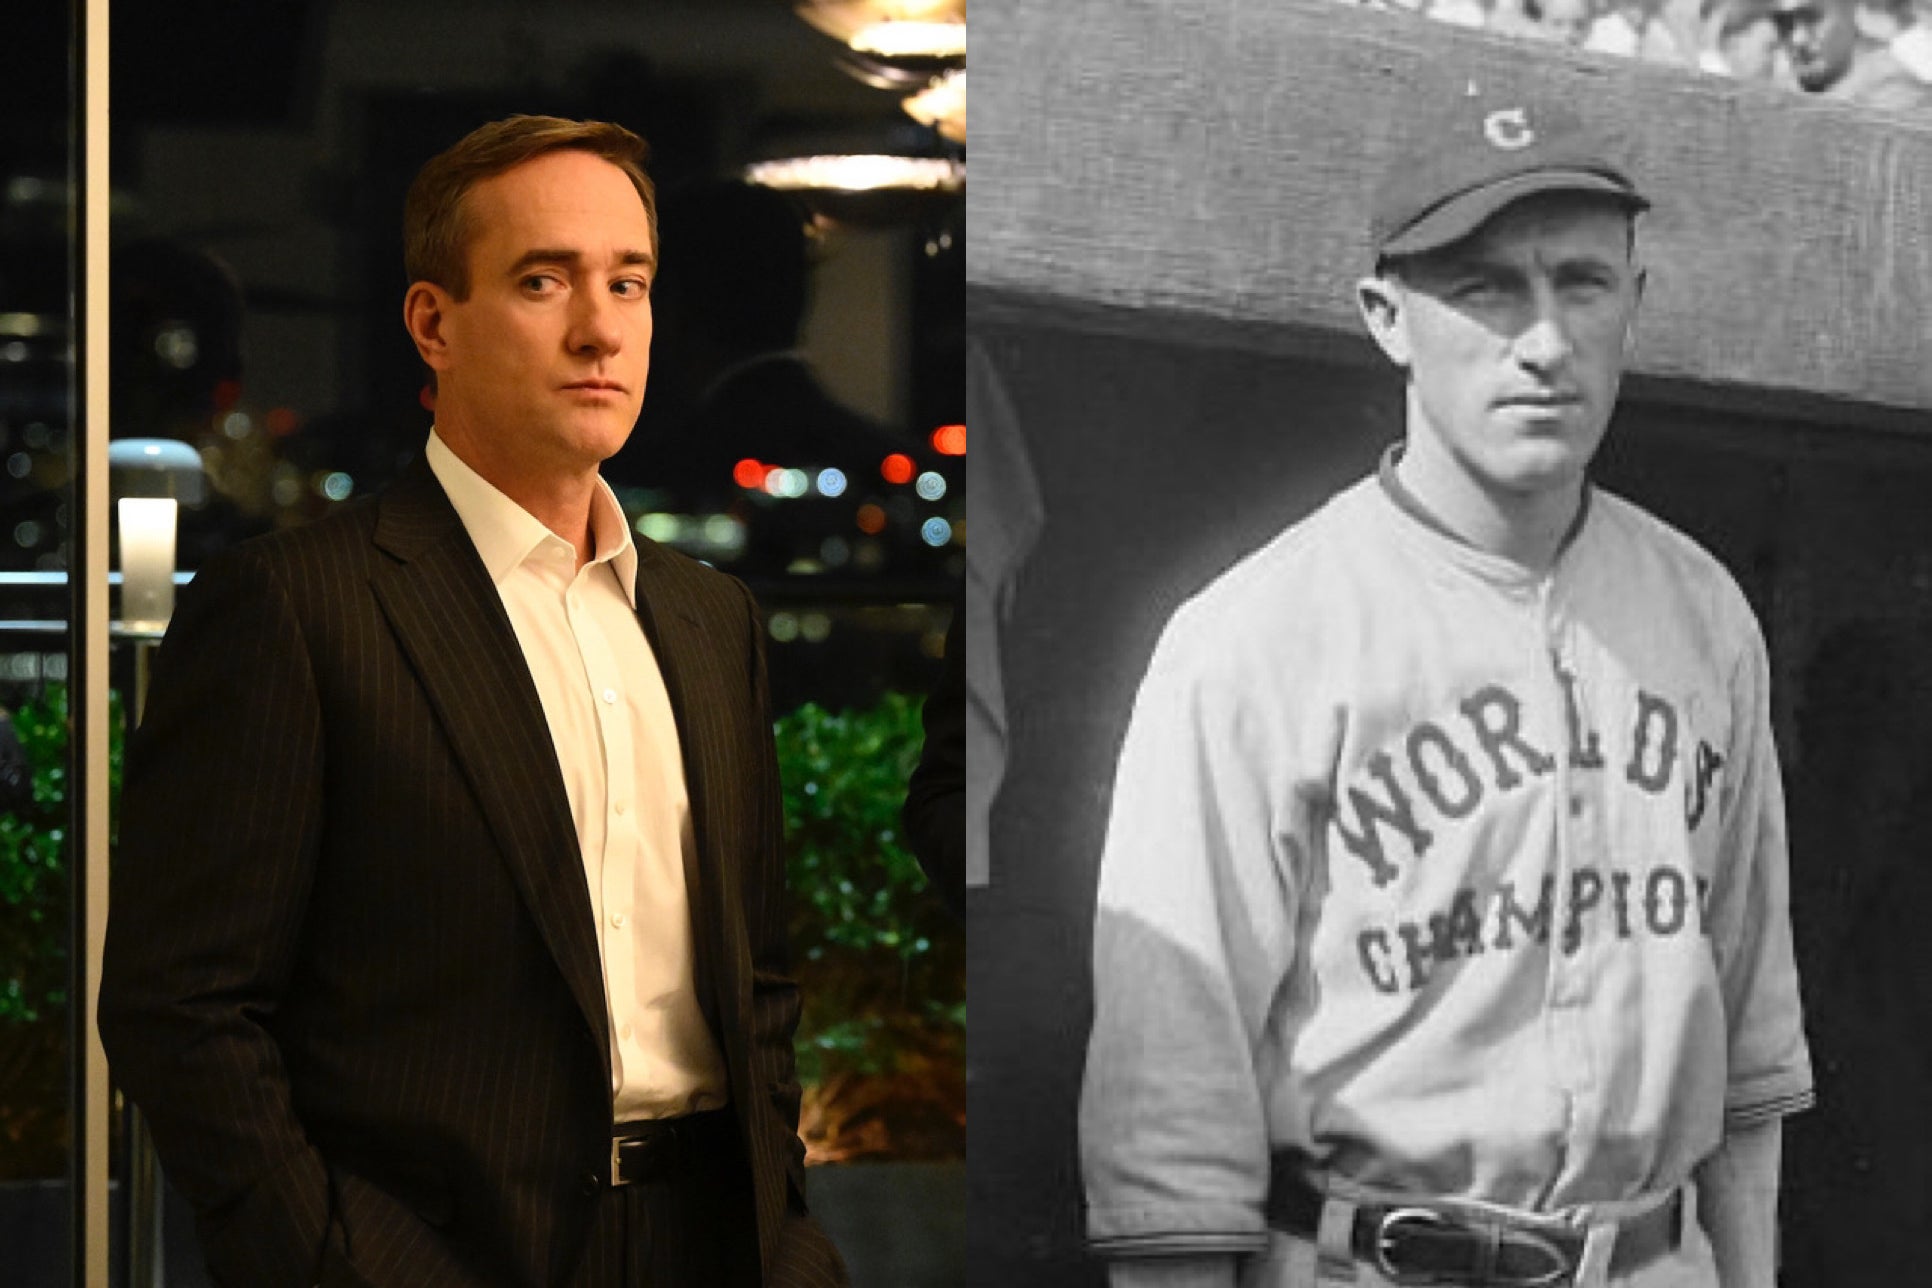 On the left, a man in a suit with his top button unbuttoned, looking shifty-eyed. On the right, a black-and-white photo of a 1910s/1920s baseball player, with a jersey reading "Worlds Champion."